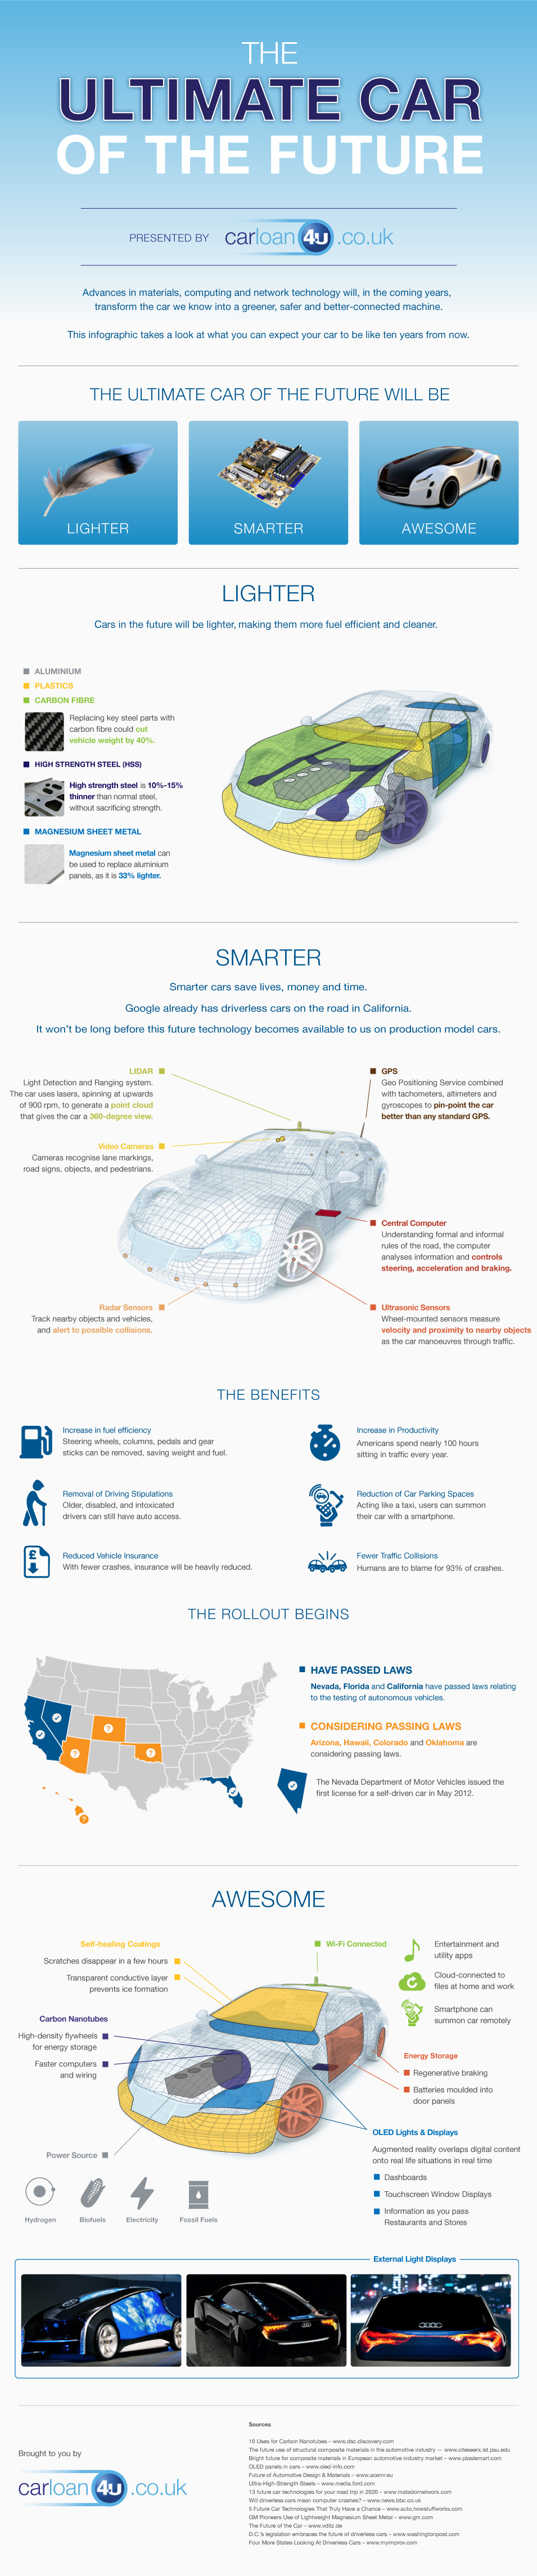 Ultimate car of the future infographic